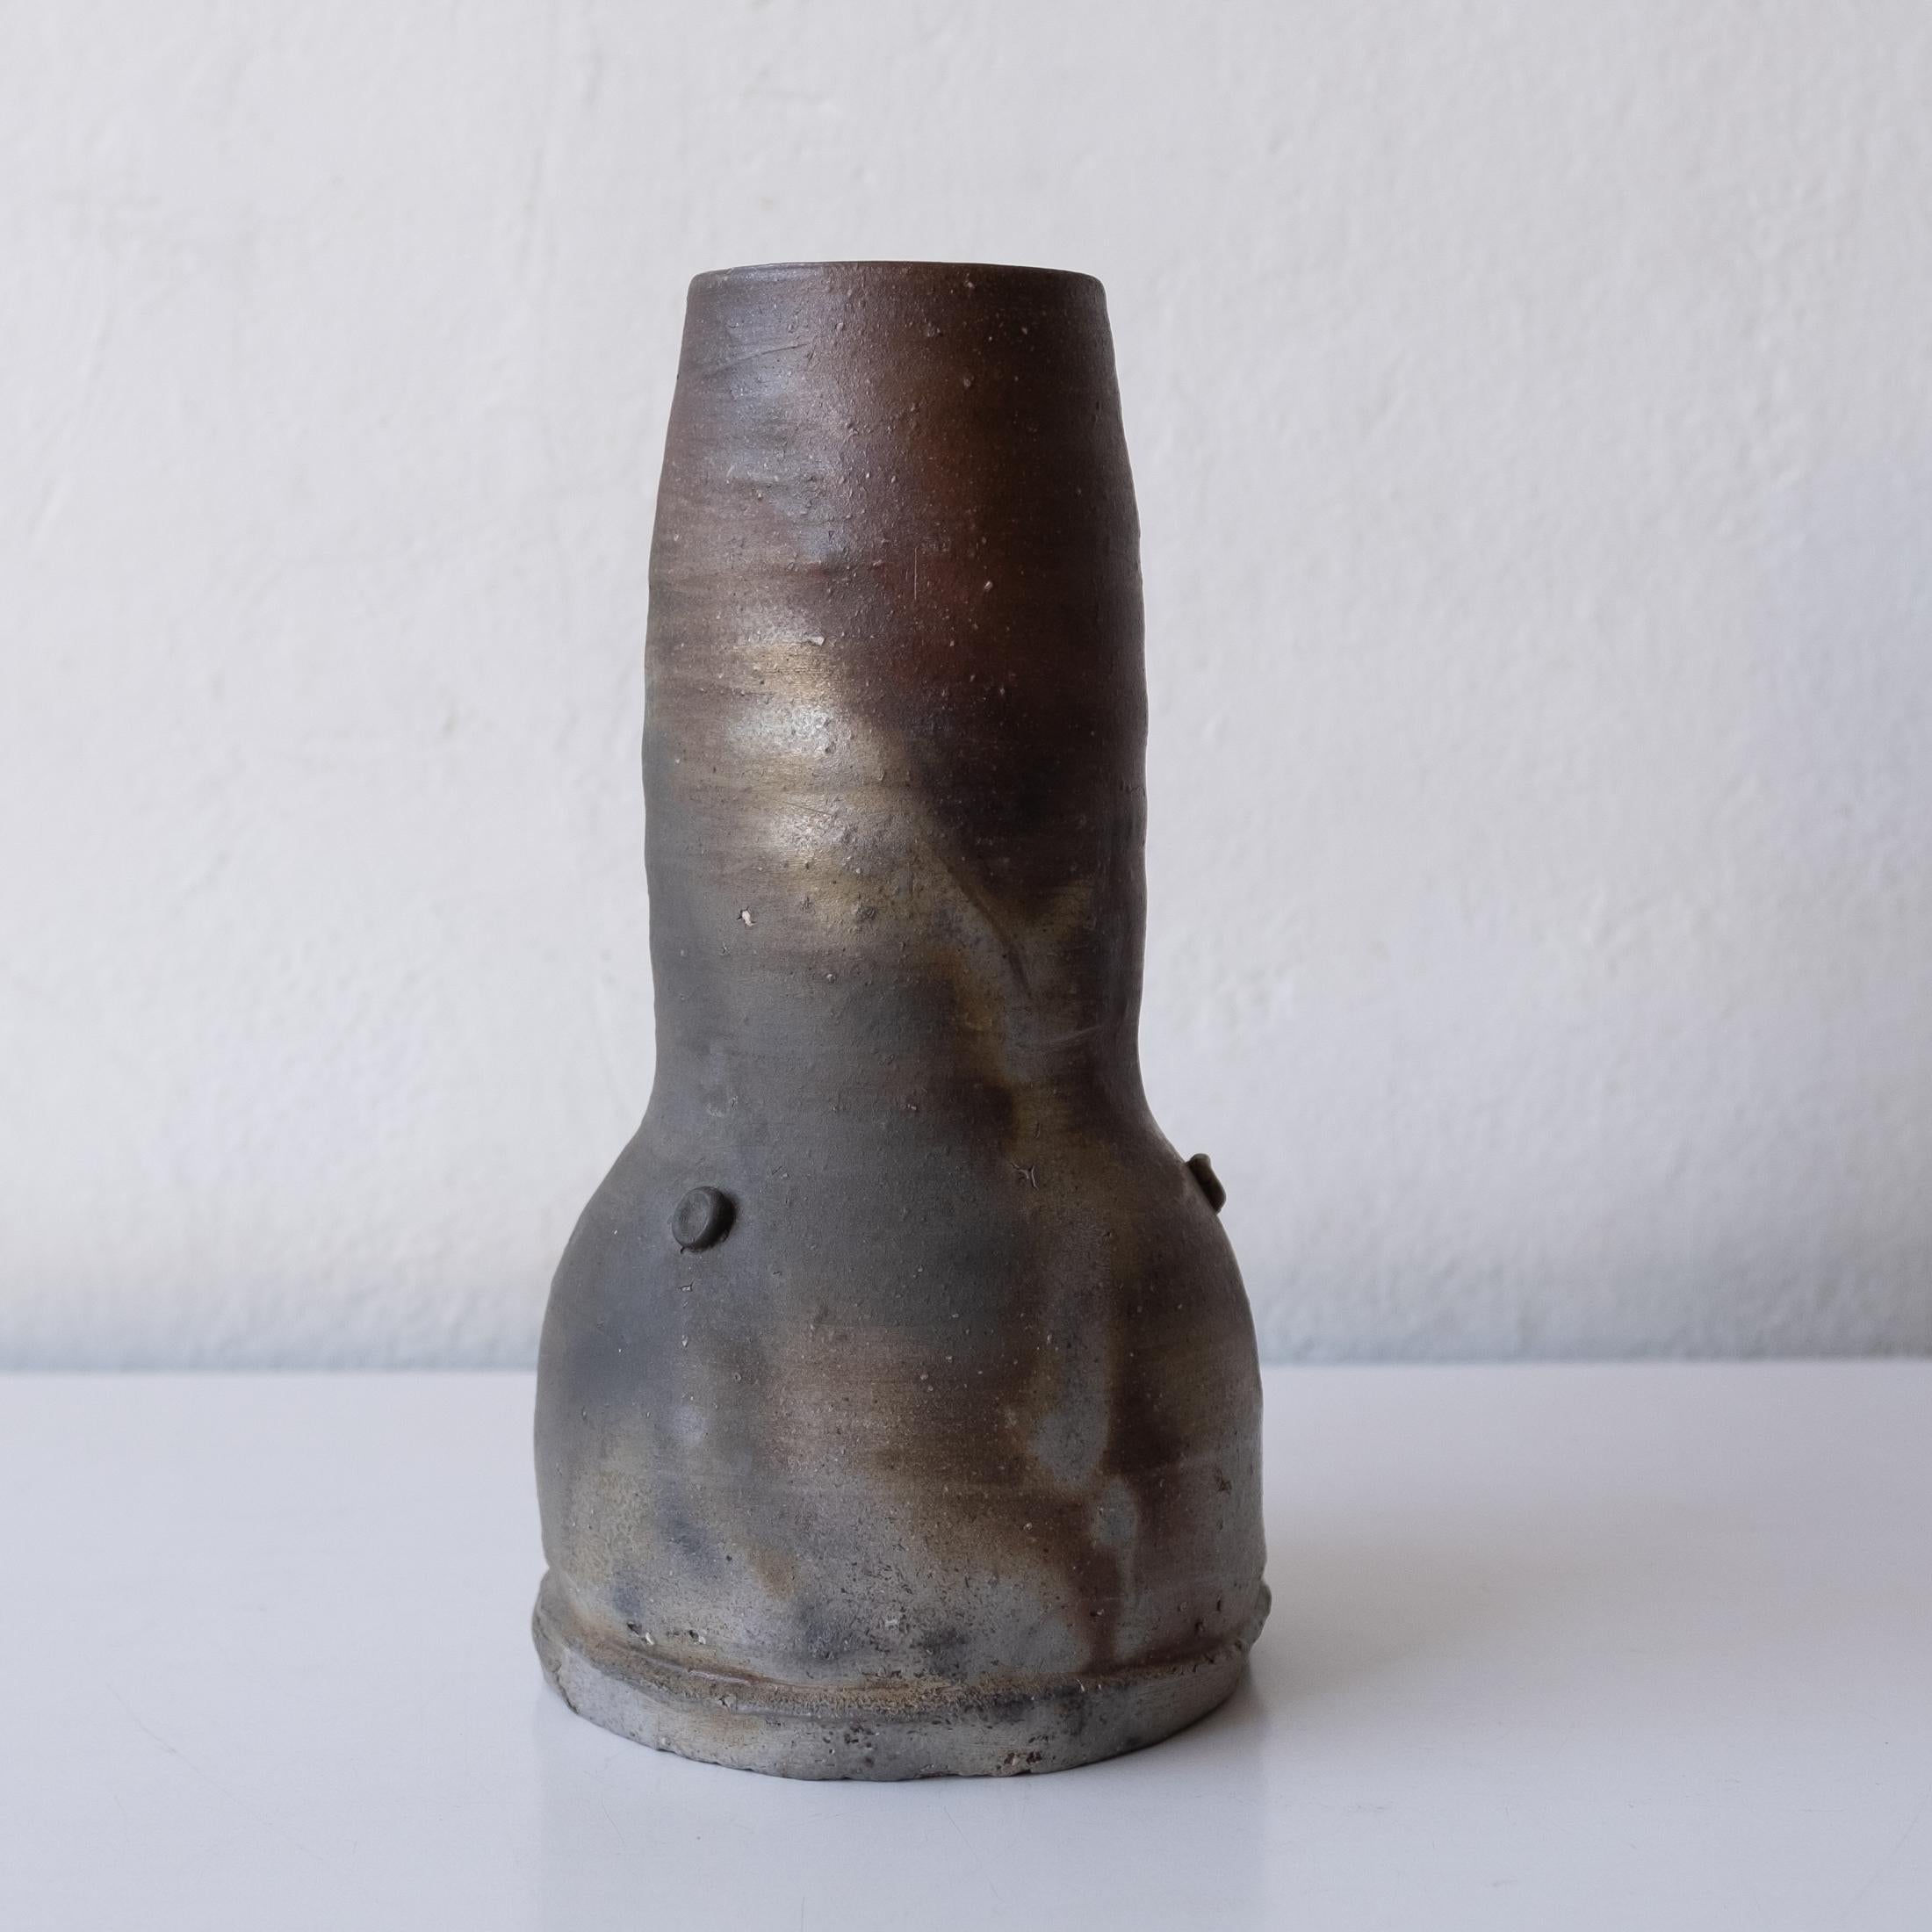 Brutalist Japanese Bizen vase with signed presentation box. An unusual and attractive modernist form. Beautiful coloring from the atmospheric wood firing. A very special piece. Signed on the bottom of the vessel, box and fabric wrapping.